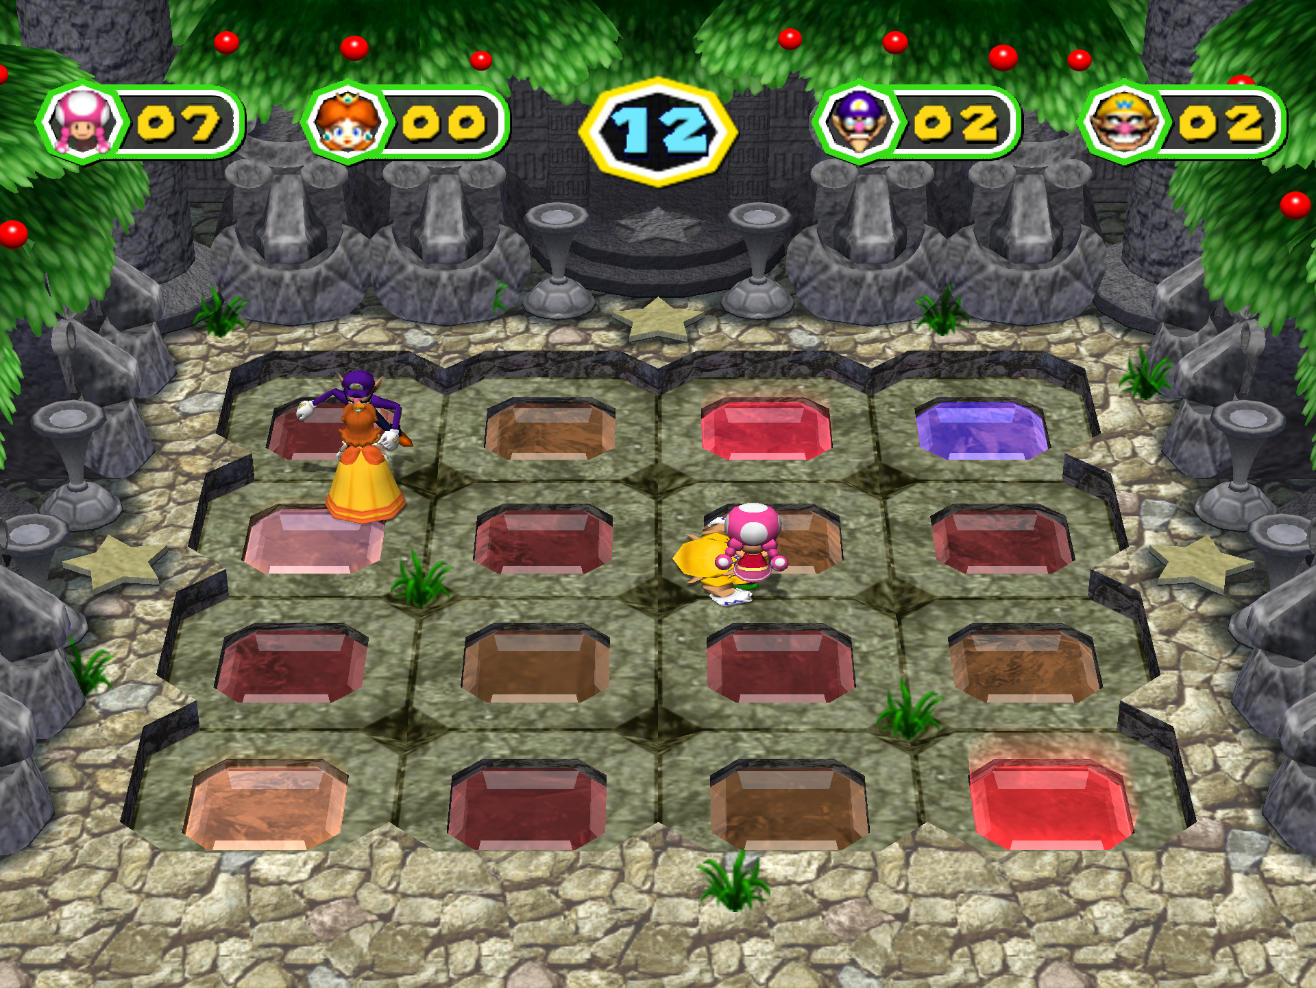 Party - My picks for the remaining mini-games in Mario Party the Top 100 Smashdance